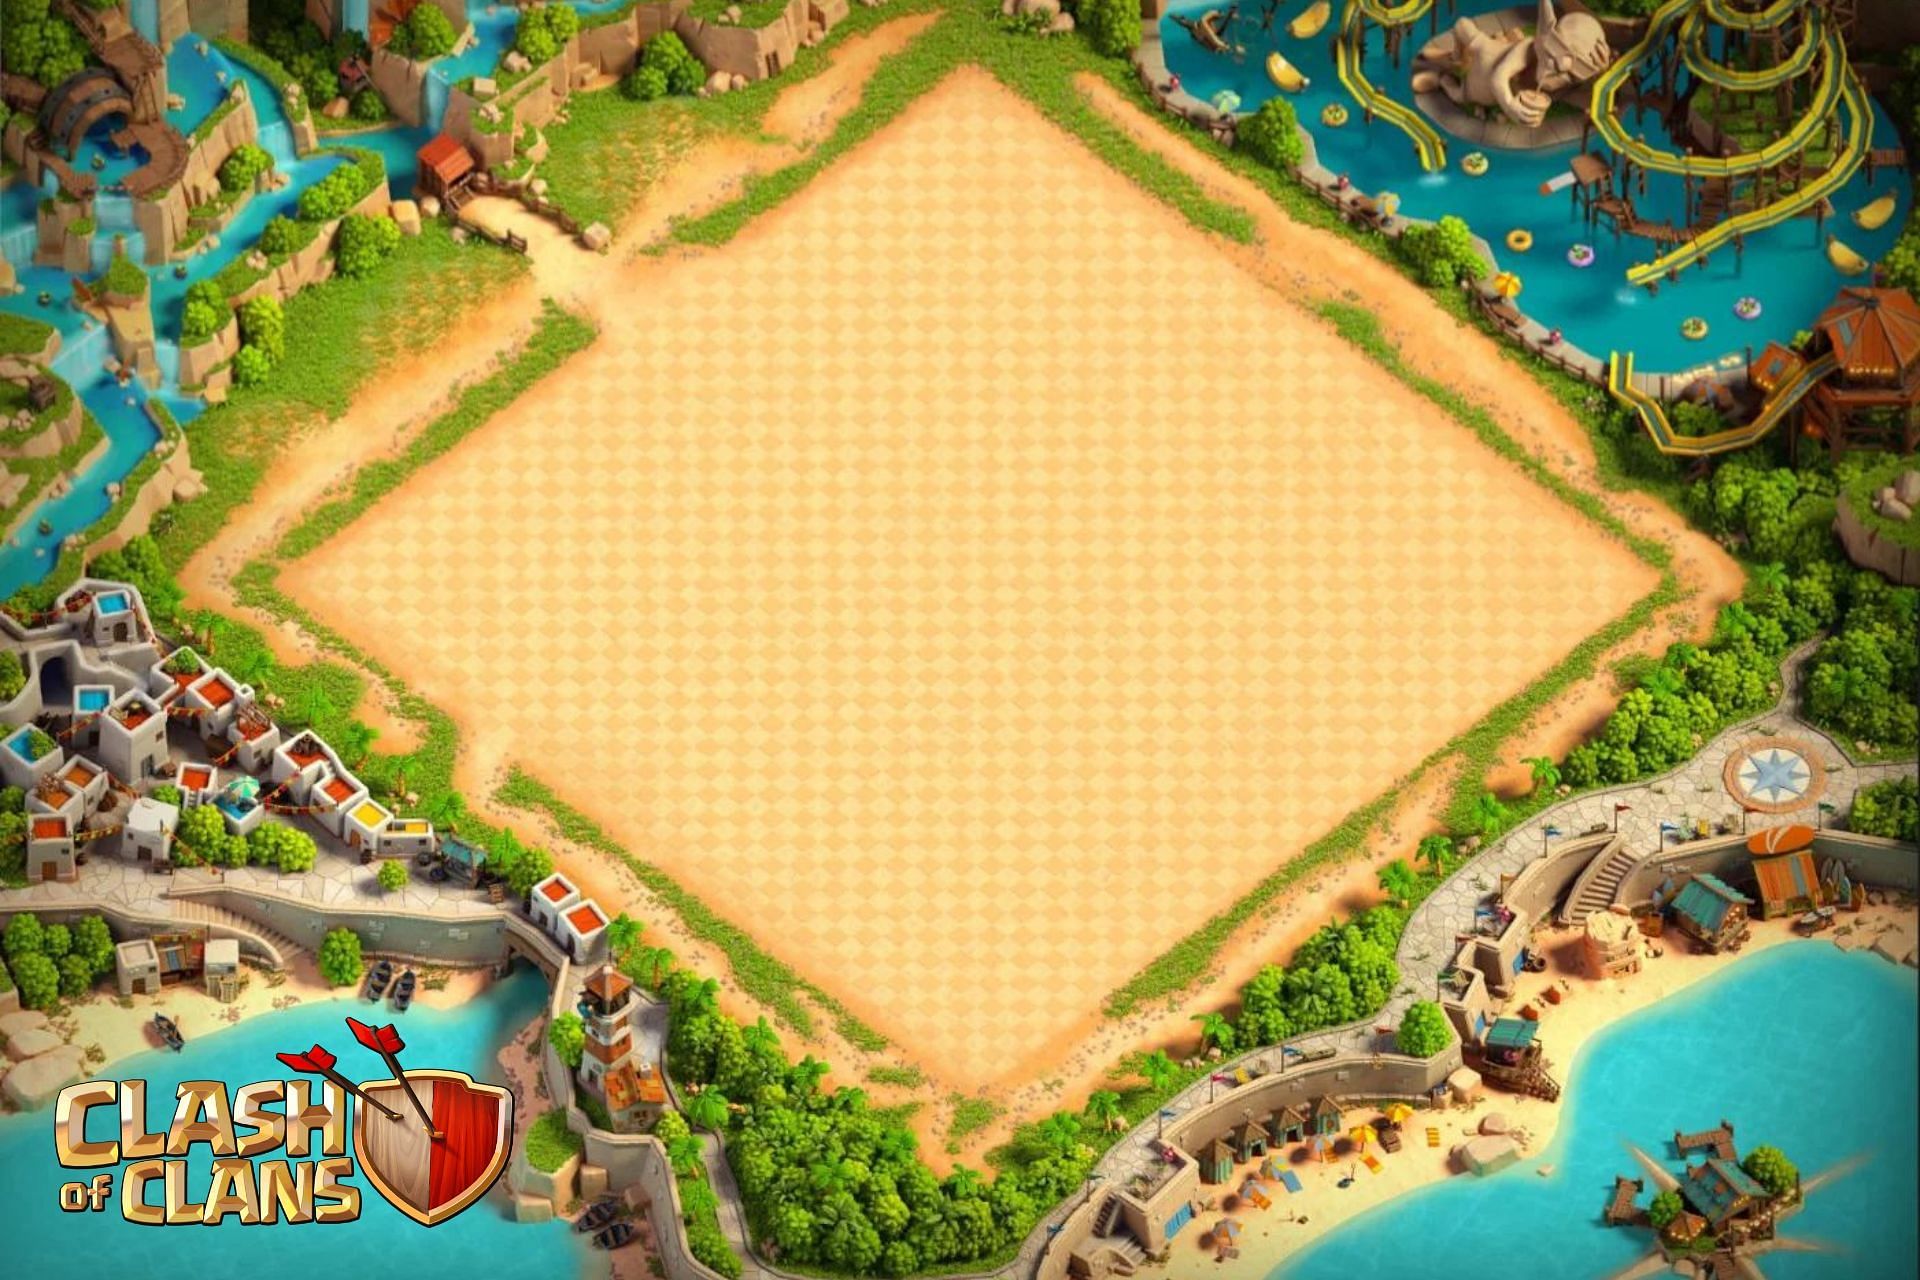 Summer Scenery in Clash of Clans New base scenery, offers, and more